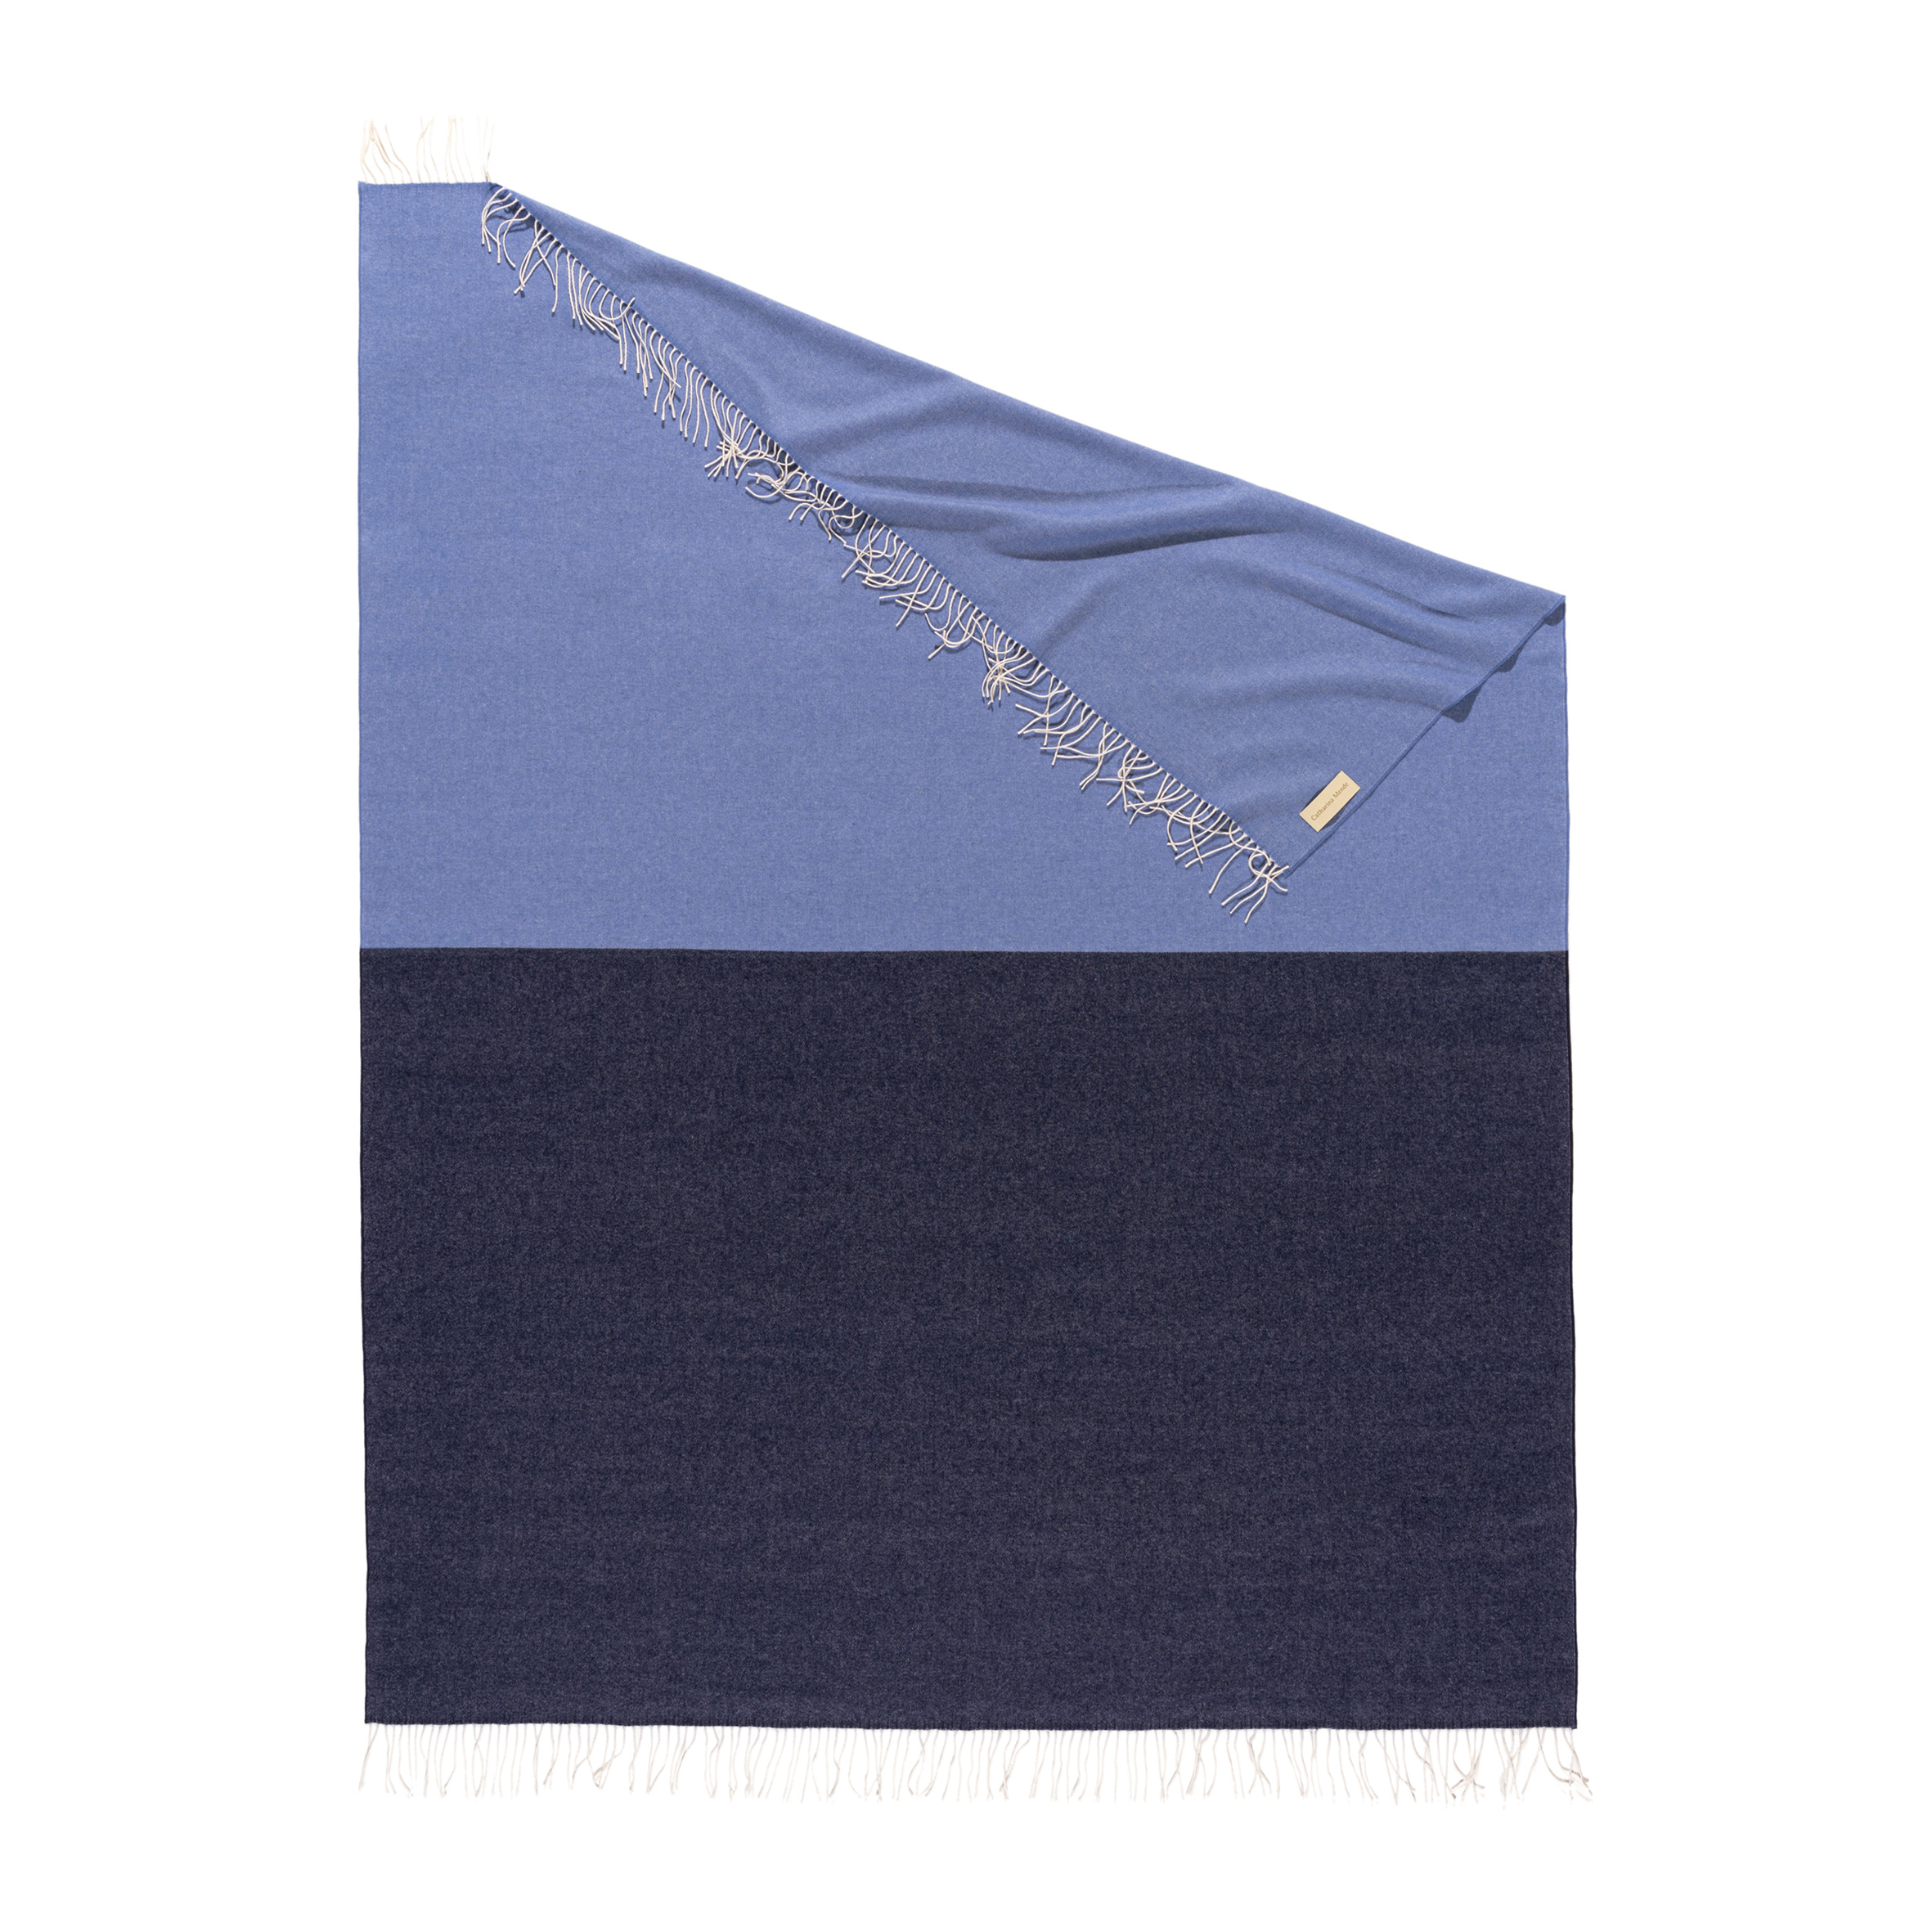 Catharina Mende Throw/Blanket Color-Blocks, Blue-Navy, woven Merino and Cashmere